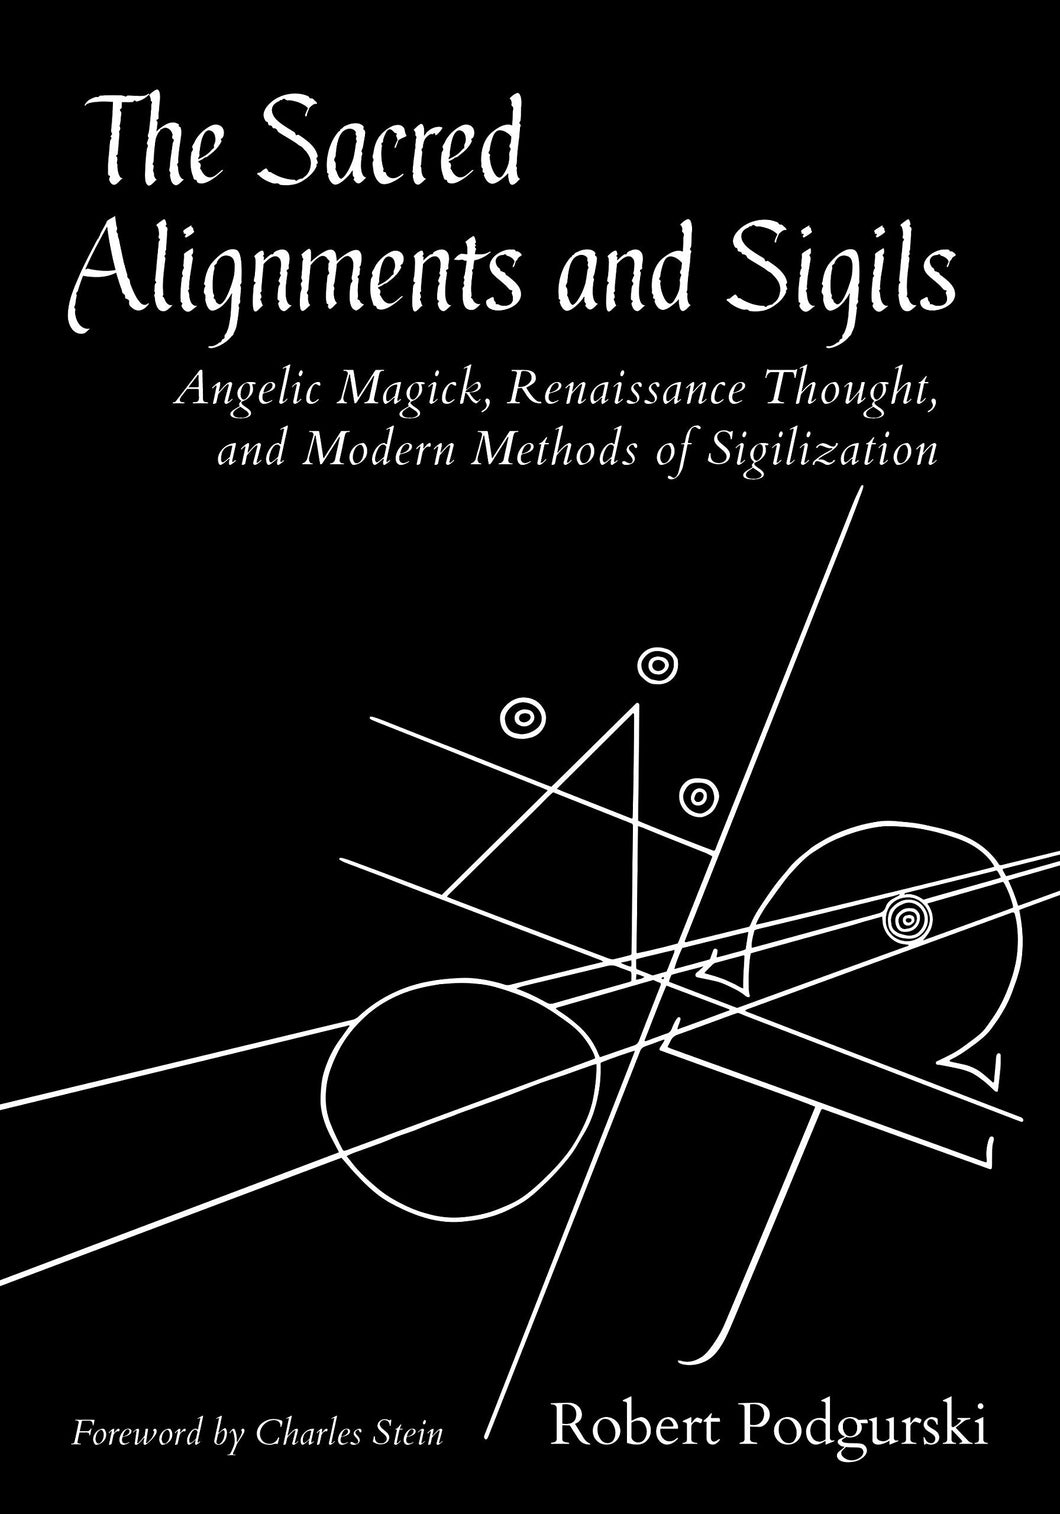 The Sacred Alignments and Sigils: Angelic Magick, Renaissance Thought, and Modern Methods of Sigilization